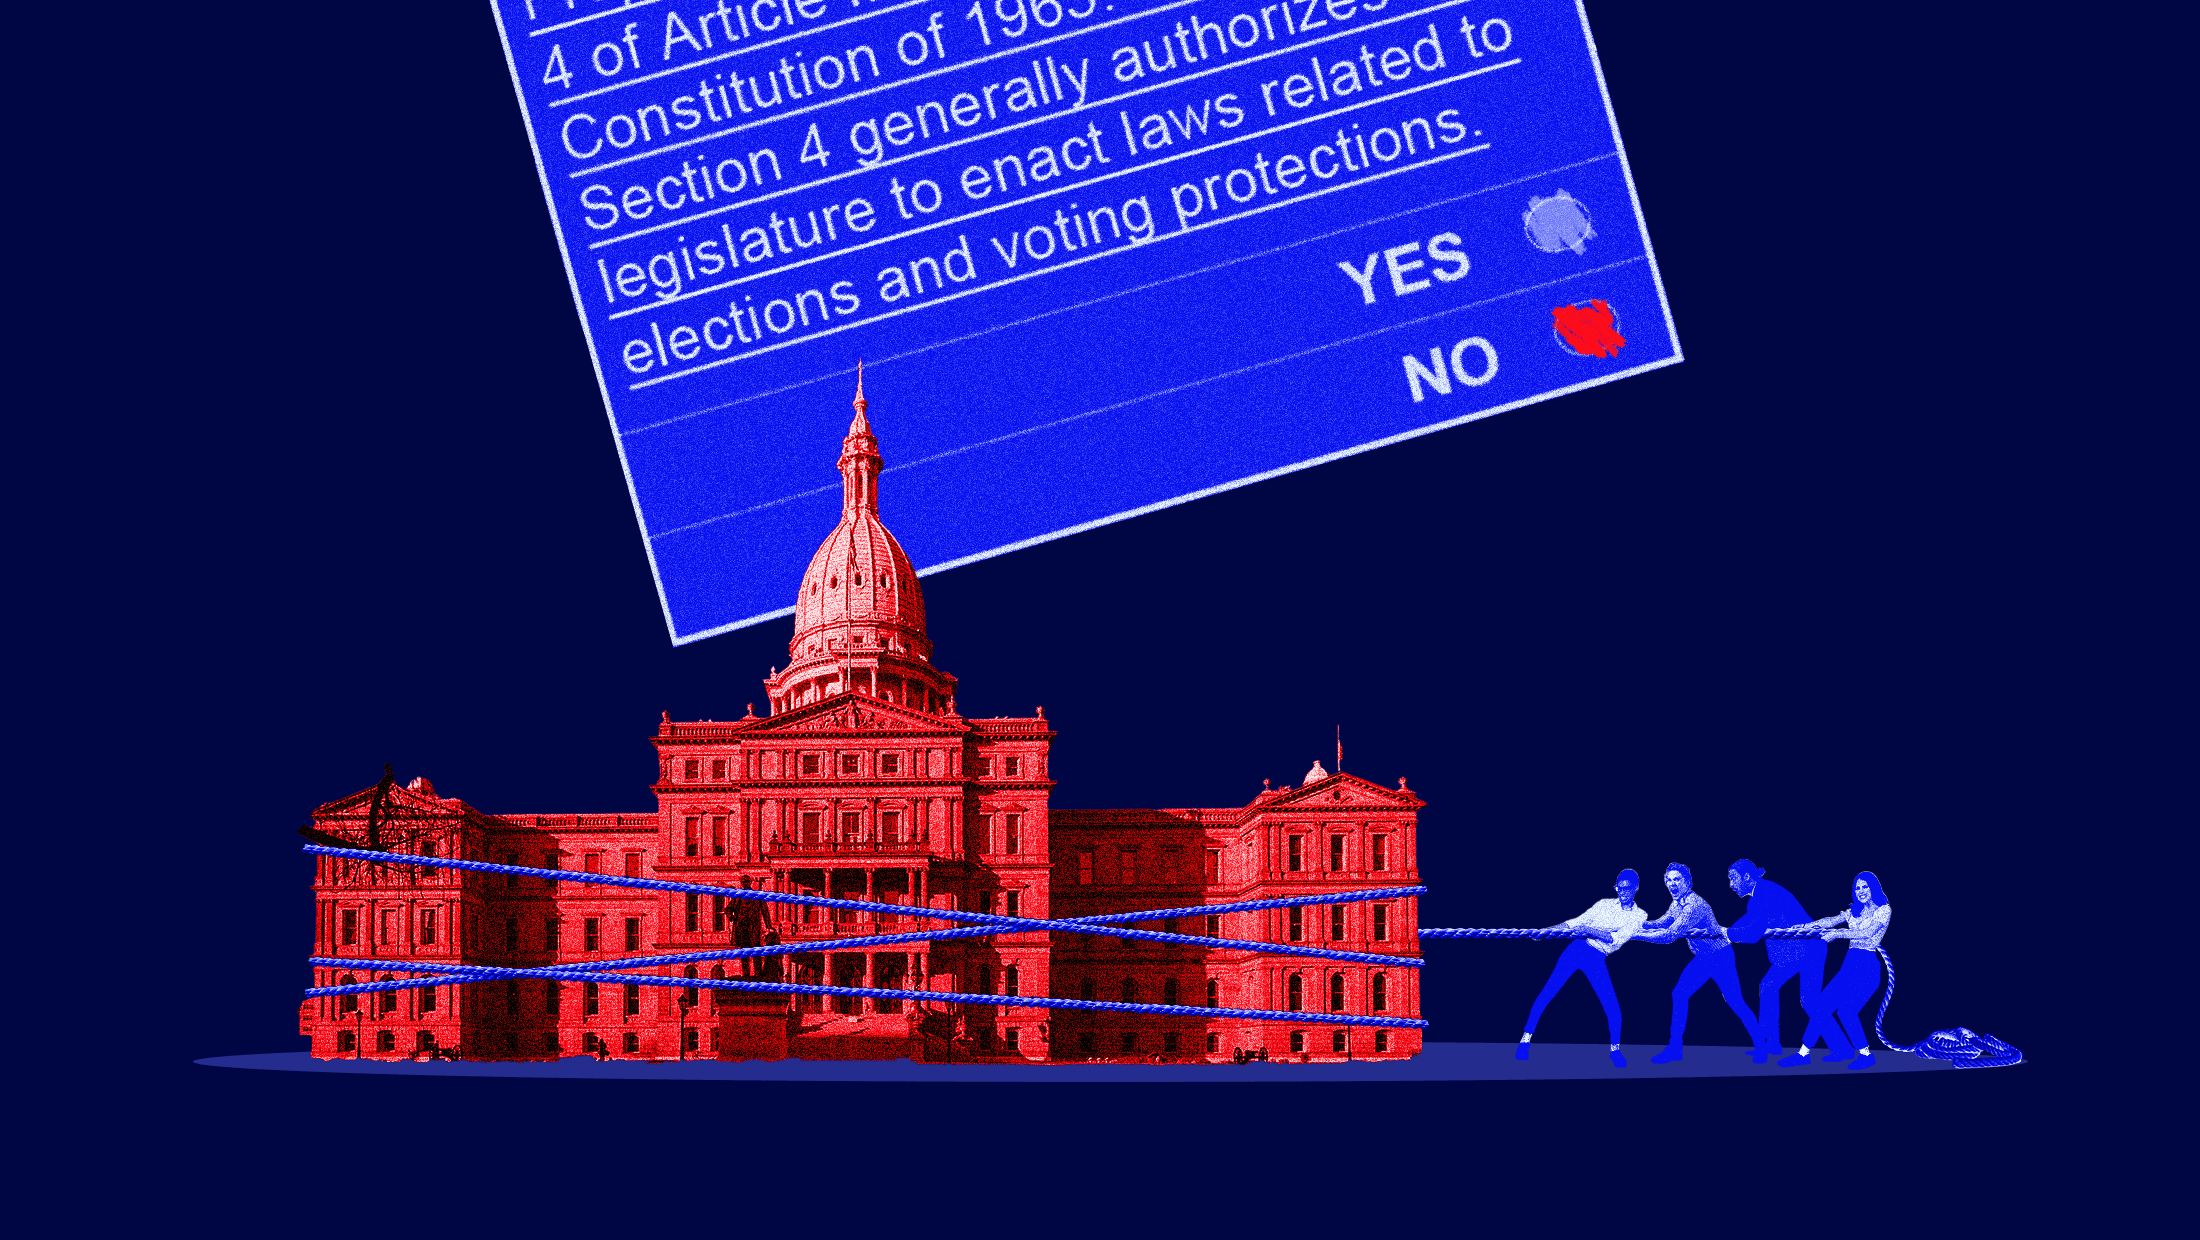 Red-colored image of the Michigan State Legislature building over a navy background. Blue ropes are tied around the building, which is being pulled in a tug-of-war type fashion by three individuals to the right of the building. Above the building is a picture of the ballot language for a 2022 Michigan pro-voting state constitutional amendment. On the depicted ballot is the option to vote “YES” or “NO.” The “YES” bubble is filled in with blue ink, while the “NO” bubble is filled in with red ink.